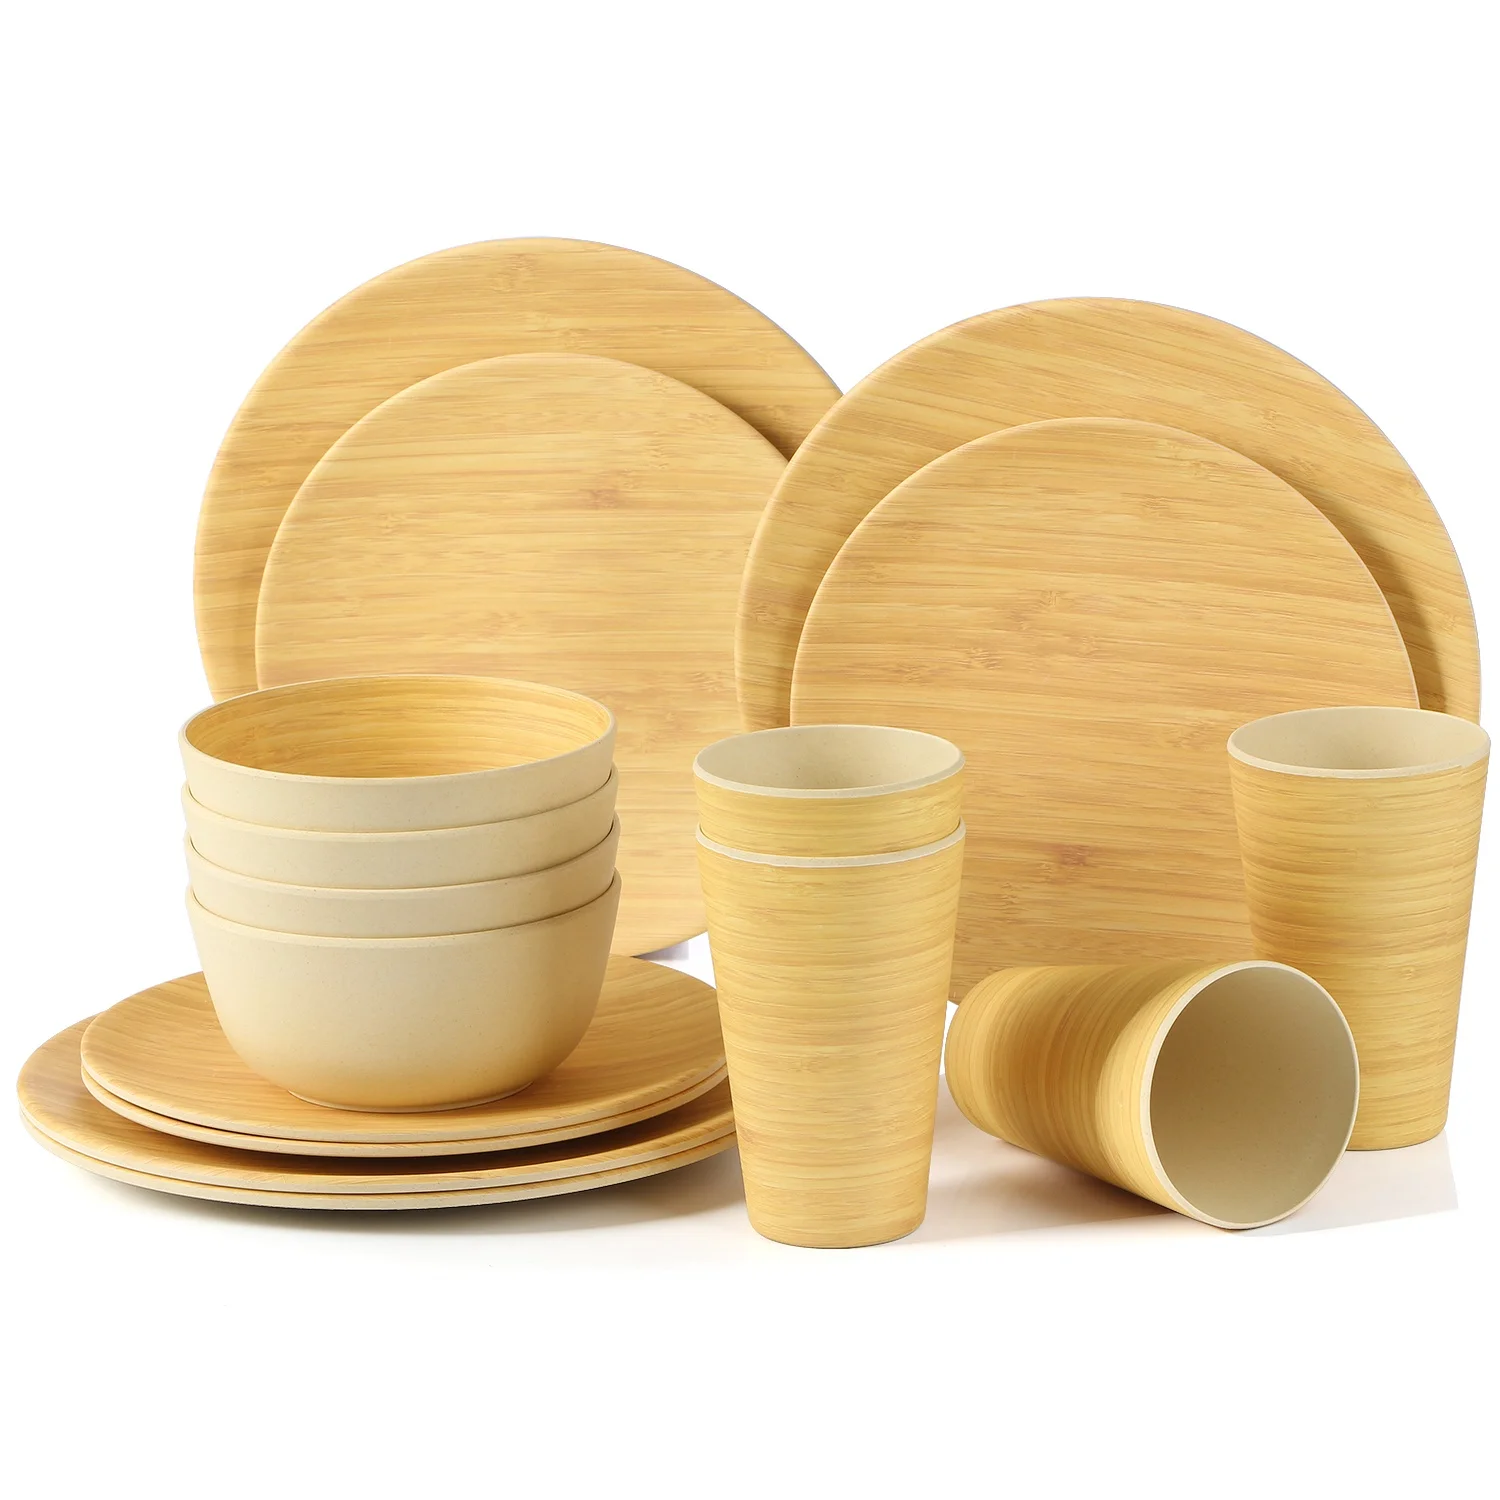 

Lekoch 16pcs Bamboo Round Plate Tableware Sets Dishes Household Solid Salad Bowl Set of Dishes Eco-friendly Plate for Gift